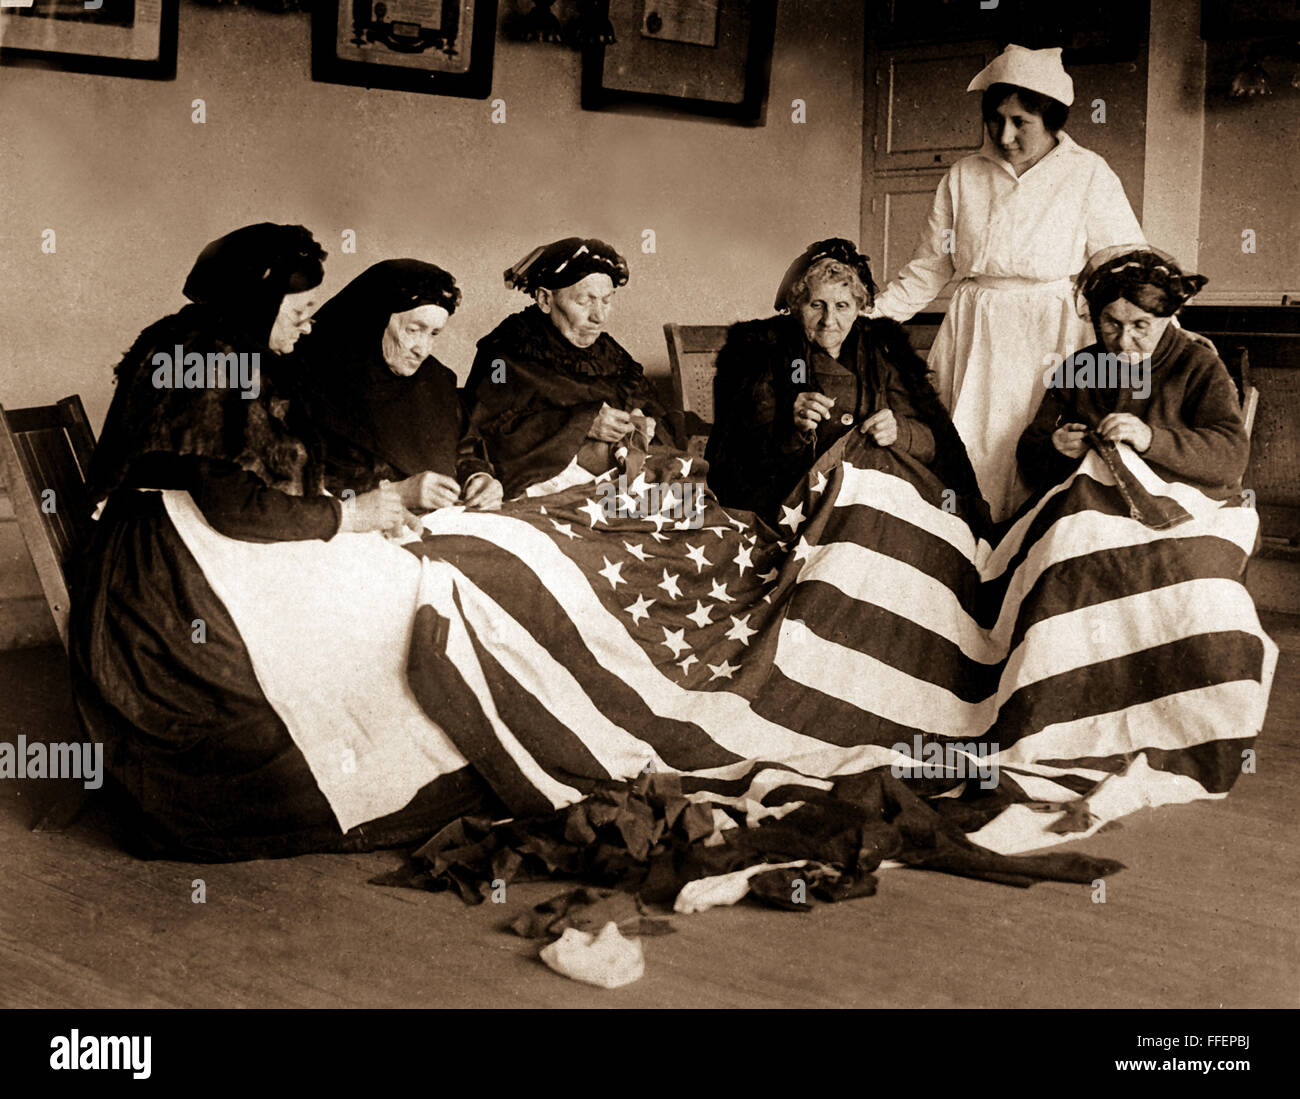 Patriotic old women make flags.  Born in Hungary, Galicia, Russia, Germany, Rumania.  Their flag-making instructor, Rose Radin, is standing.  Ca. 1918.    This archival print is available in the following sizes:    8" x 10"   $15.95 w/ FREE SHIPPING  11" x 14" $23.95 w/ FREE SHIPPING  16" x 20" $59.95 w/ FREE SHIPPING  20" x 24" $99.95 w/ FREE SHIPPING    * The American Photoarchive watermark will not appear on your print. Stock Photo